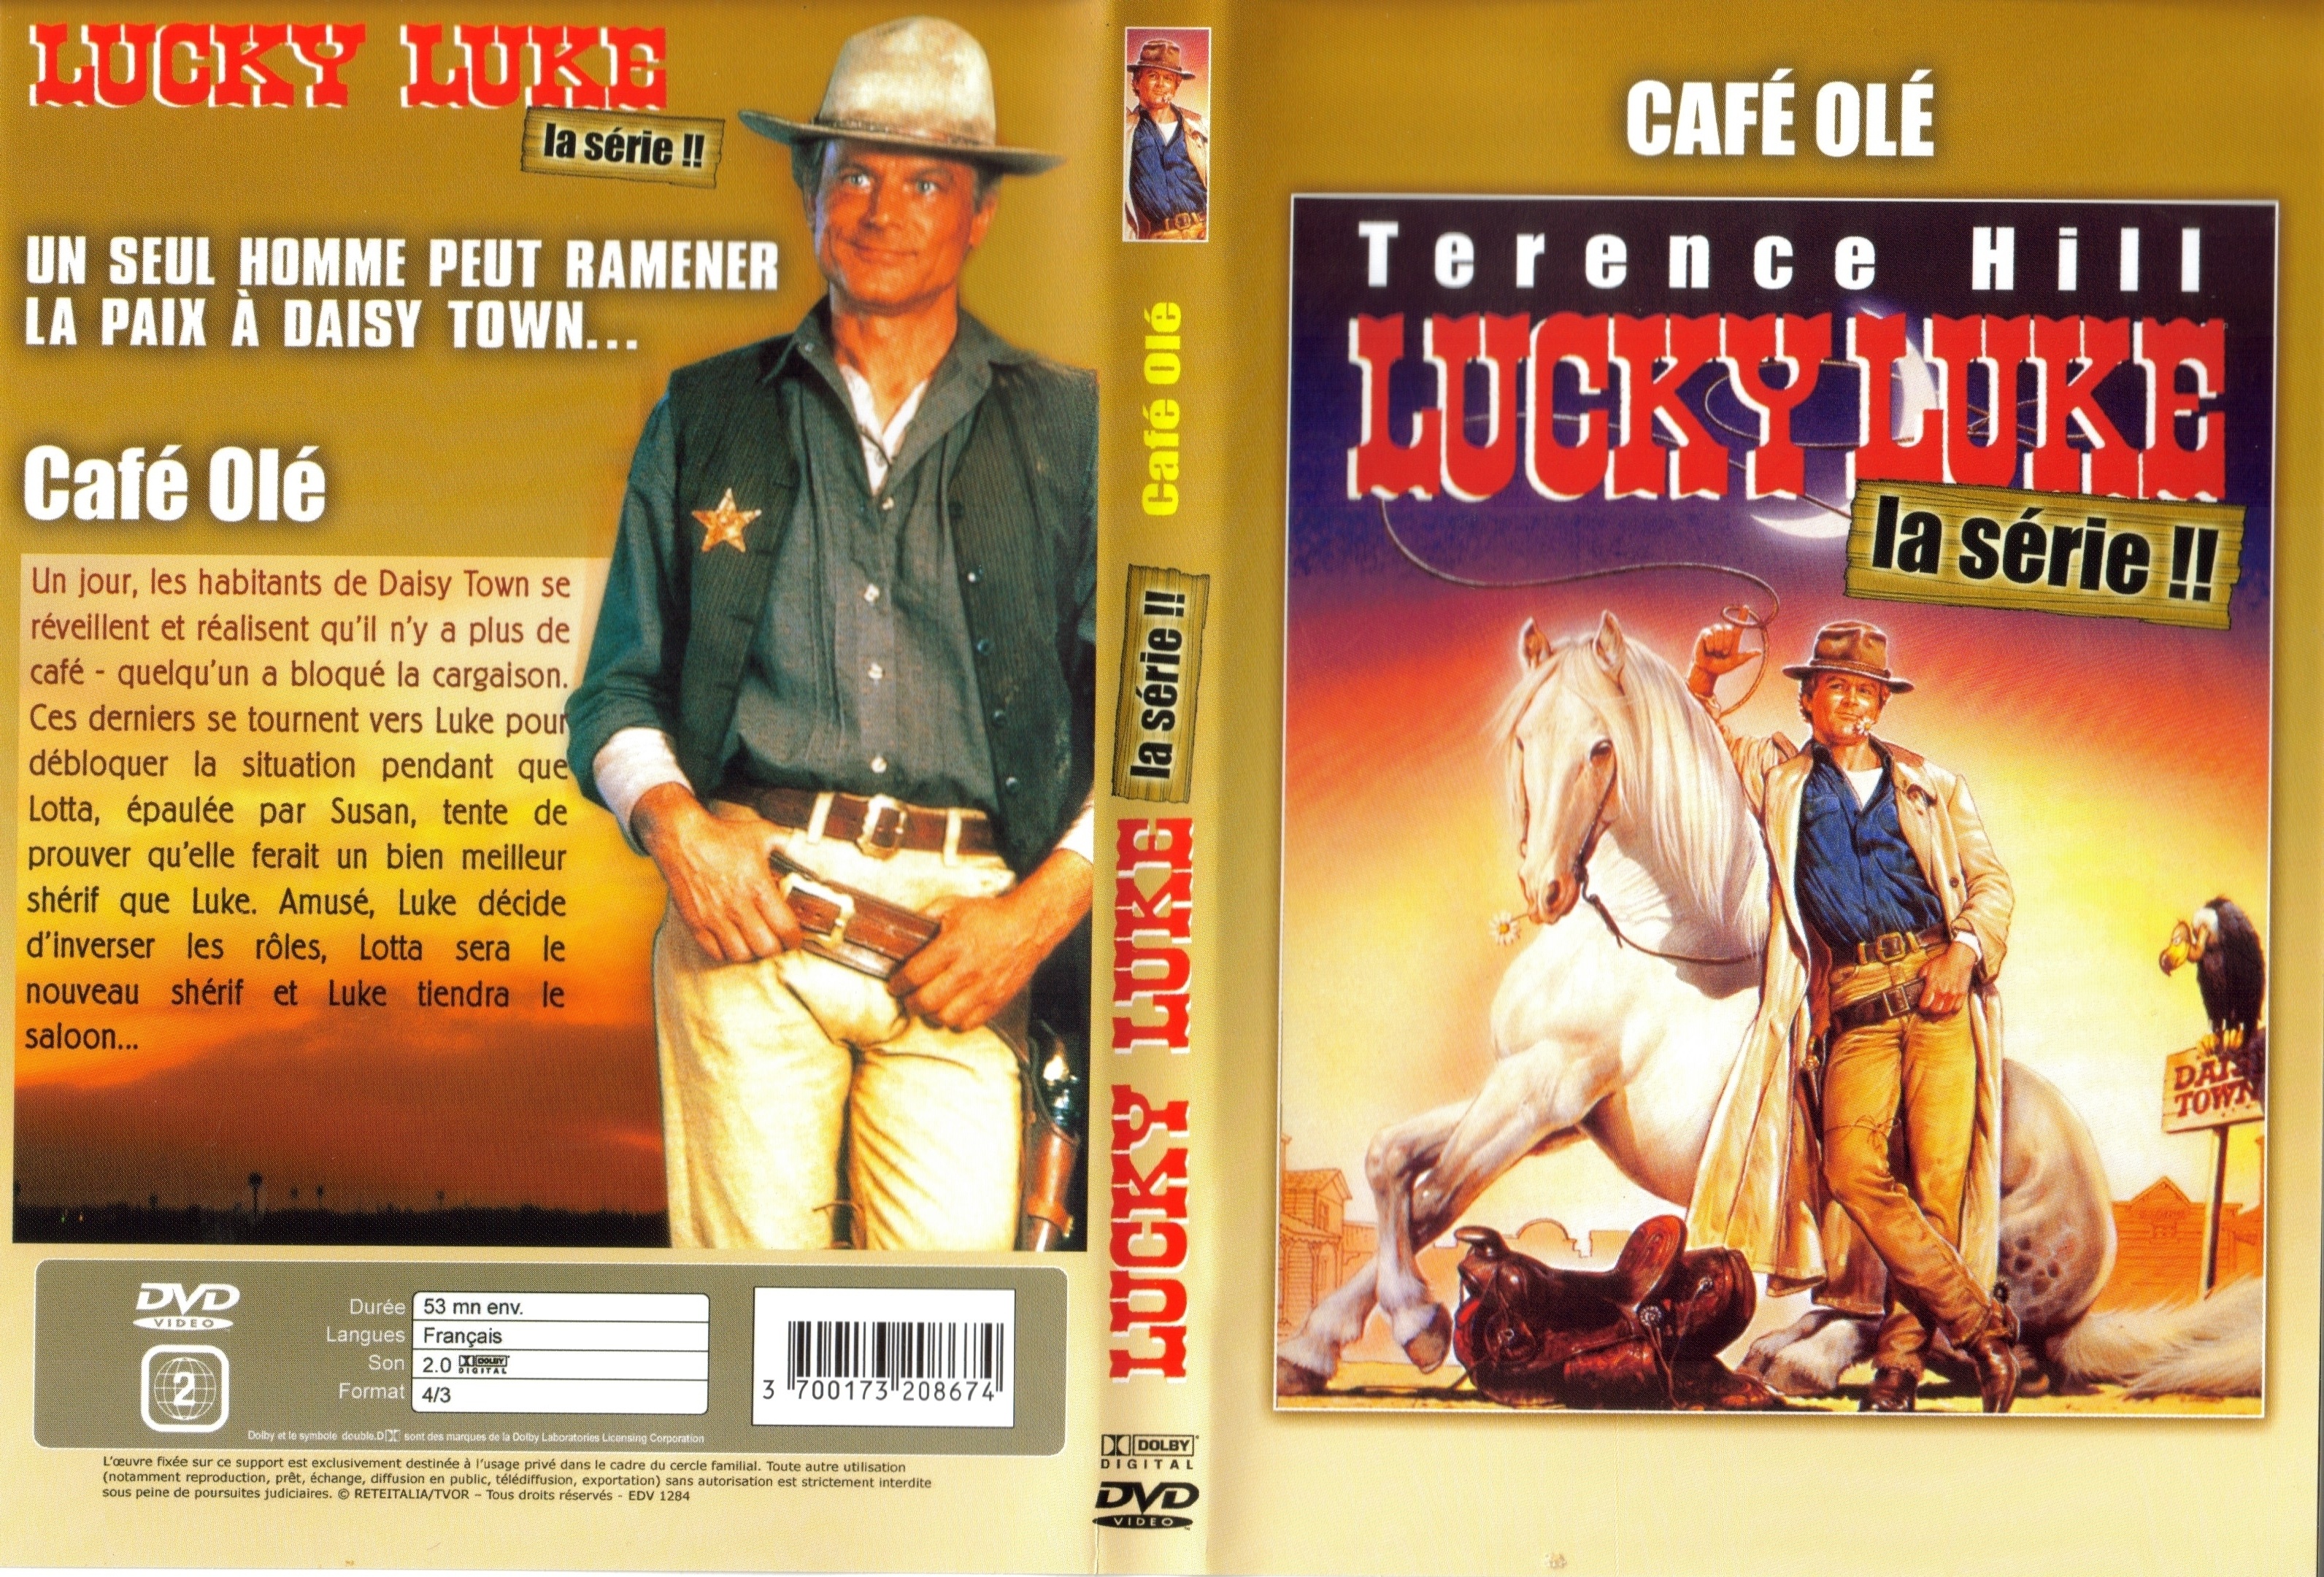 Jaquette DVD Lucky Luke (Terence Hill) - Caf ol